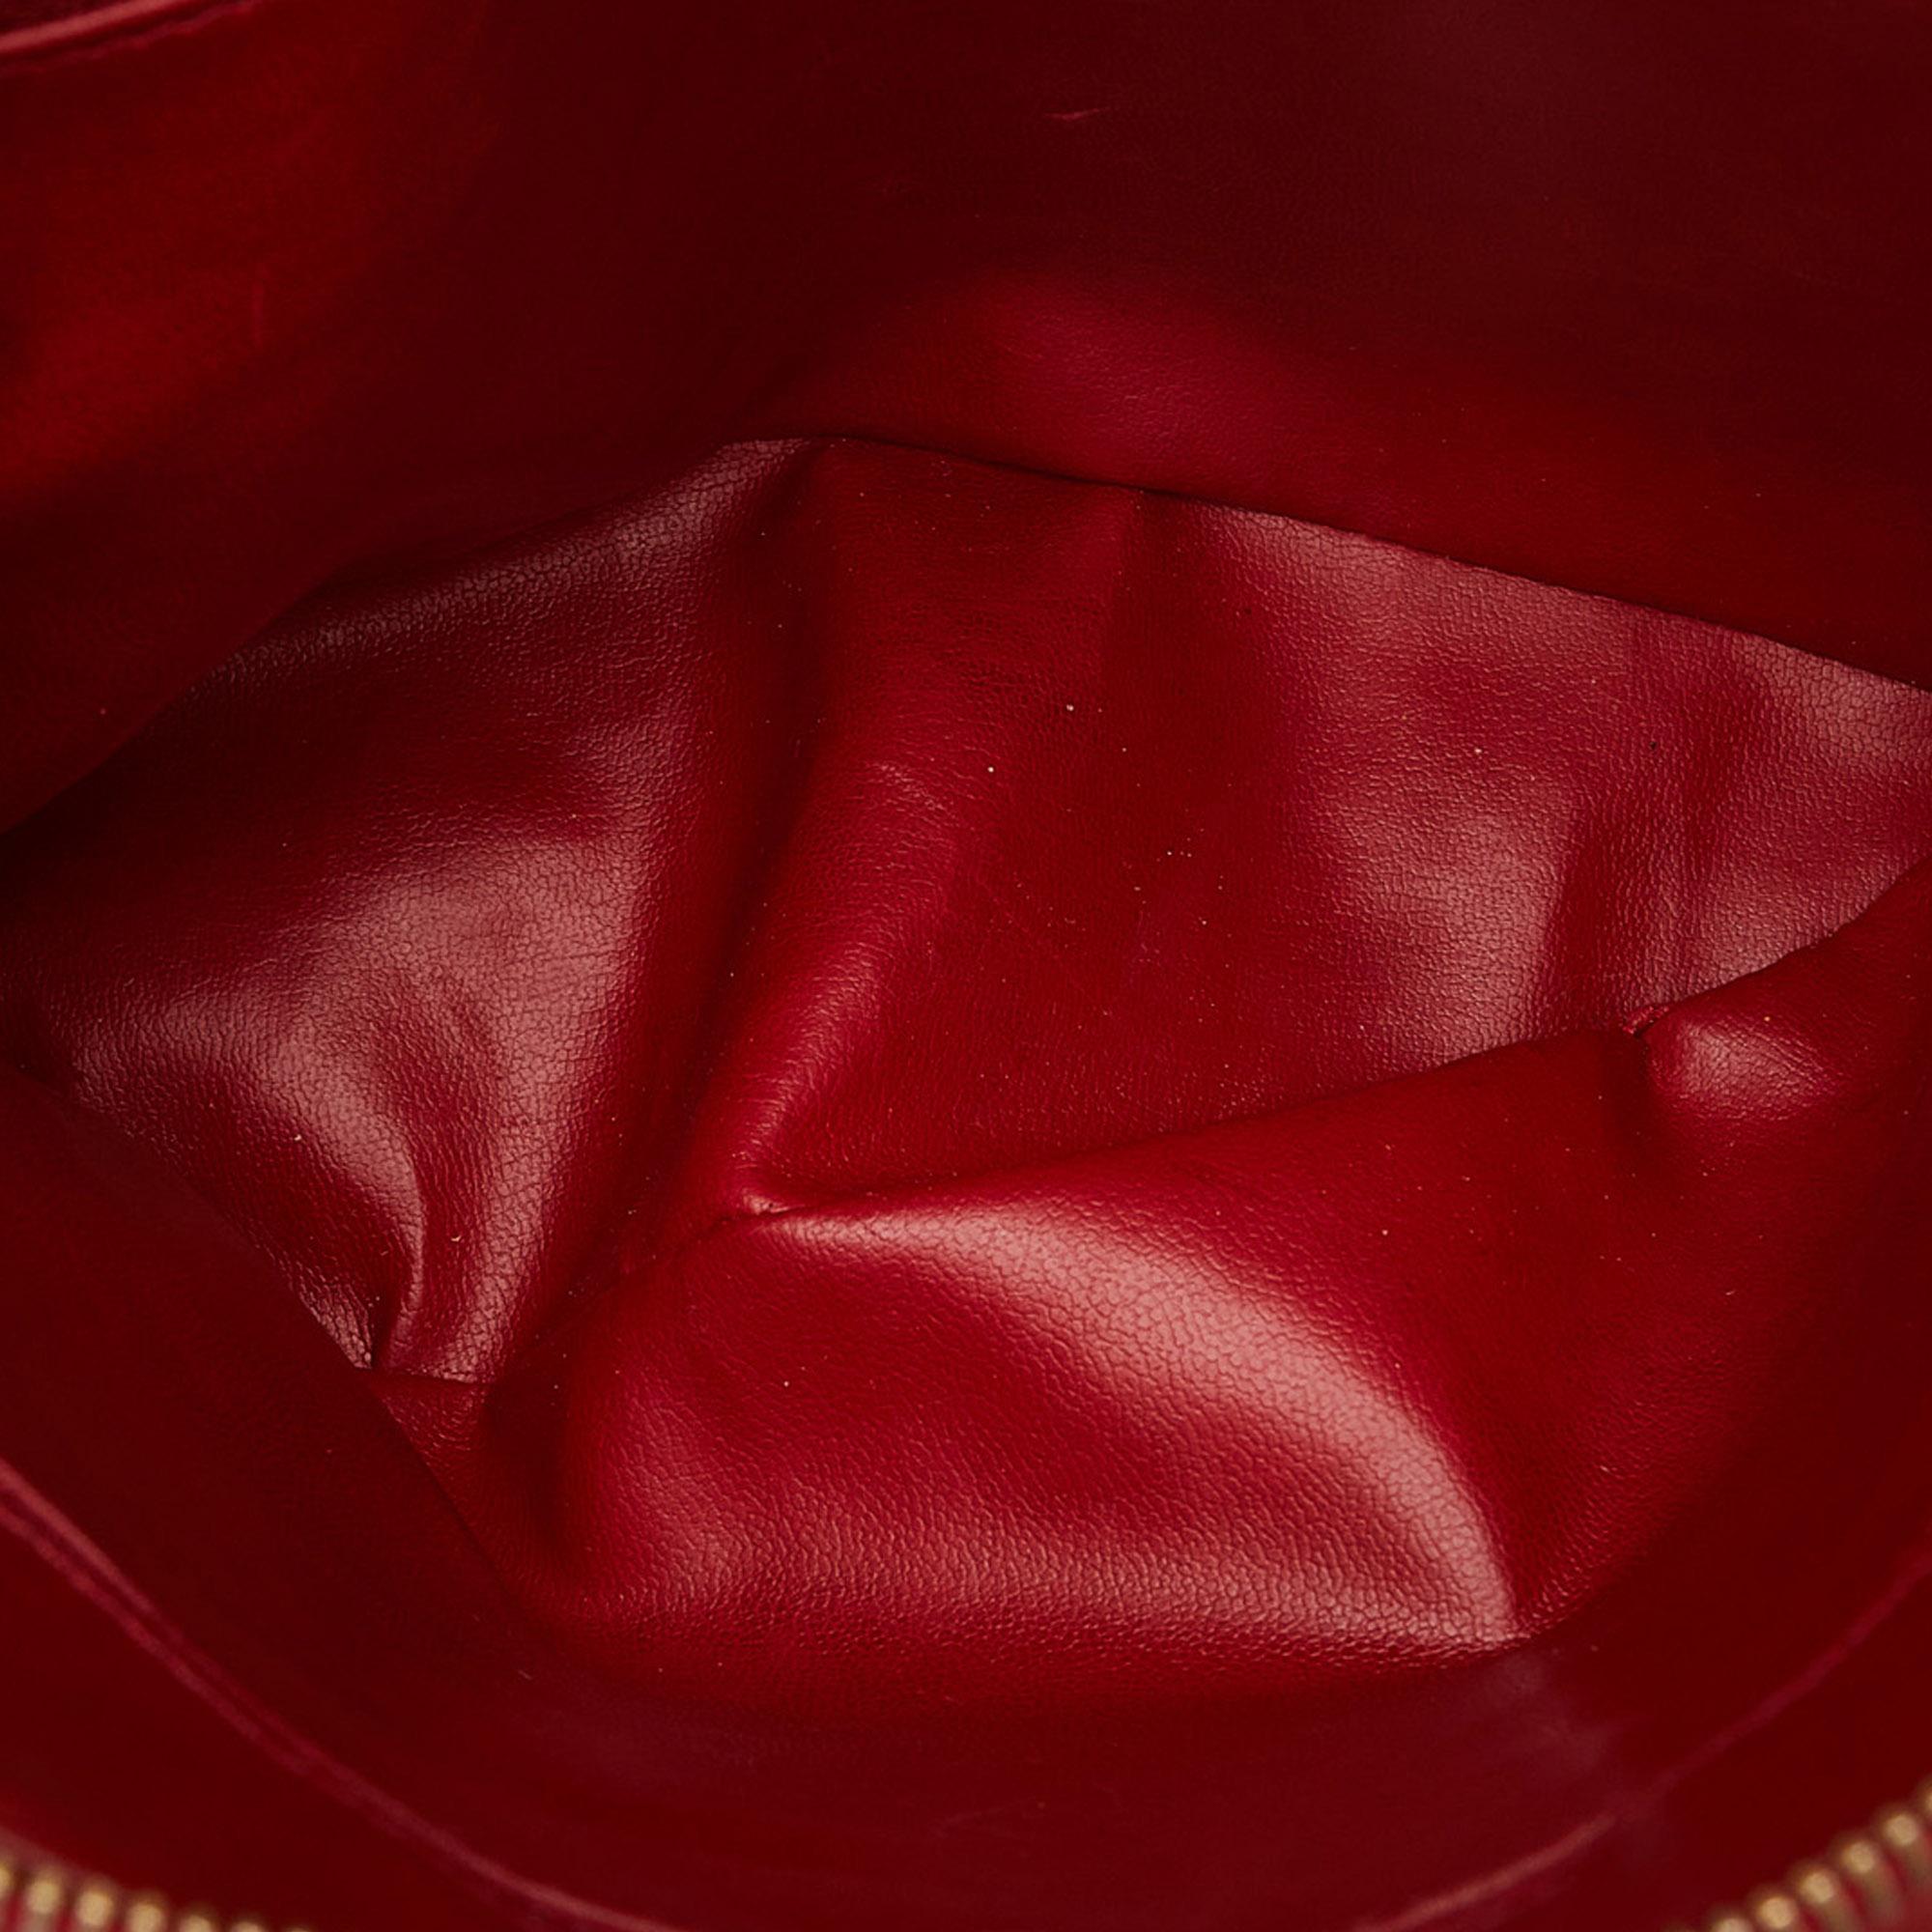 Chanel Red Quilted Lambskin Shoulder Bag